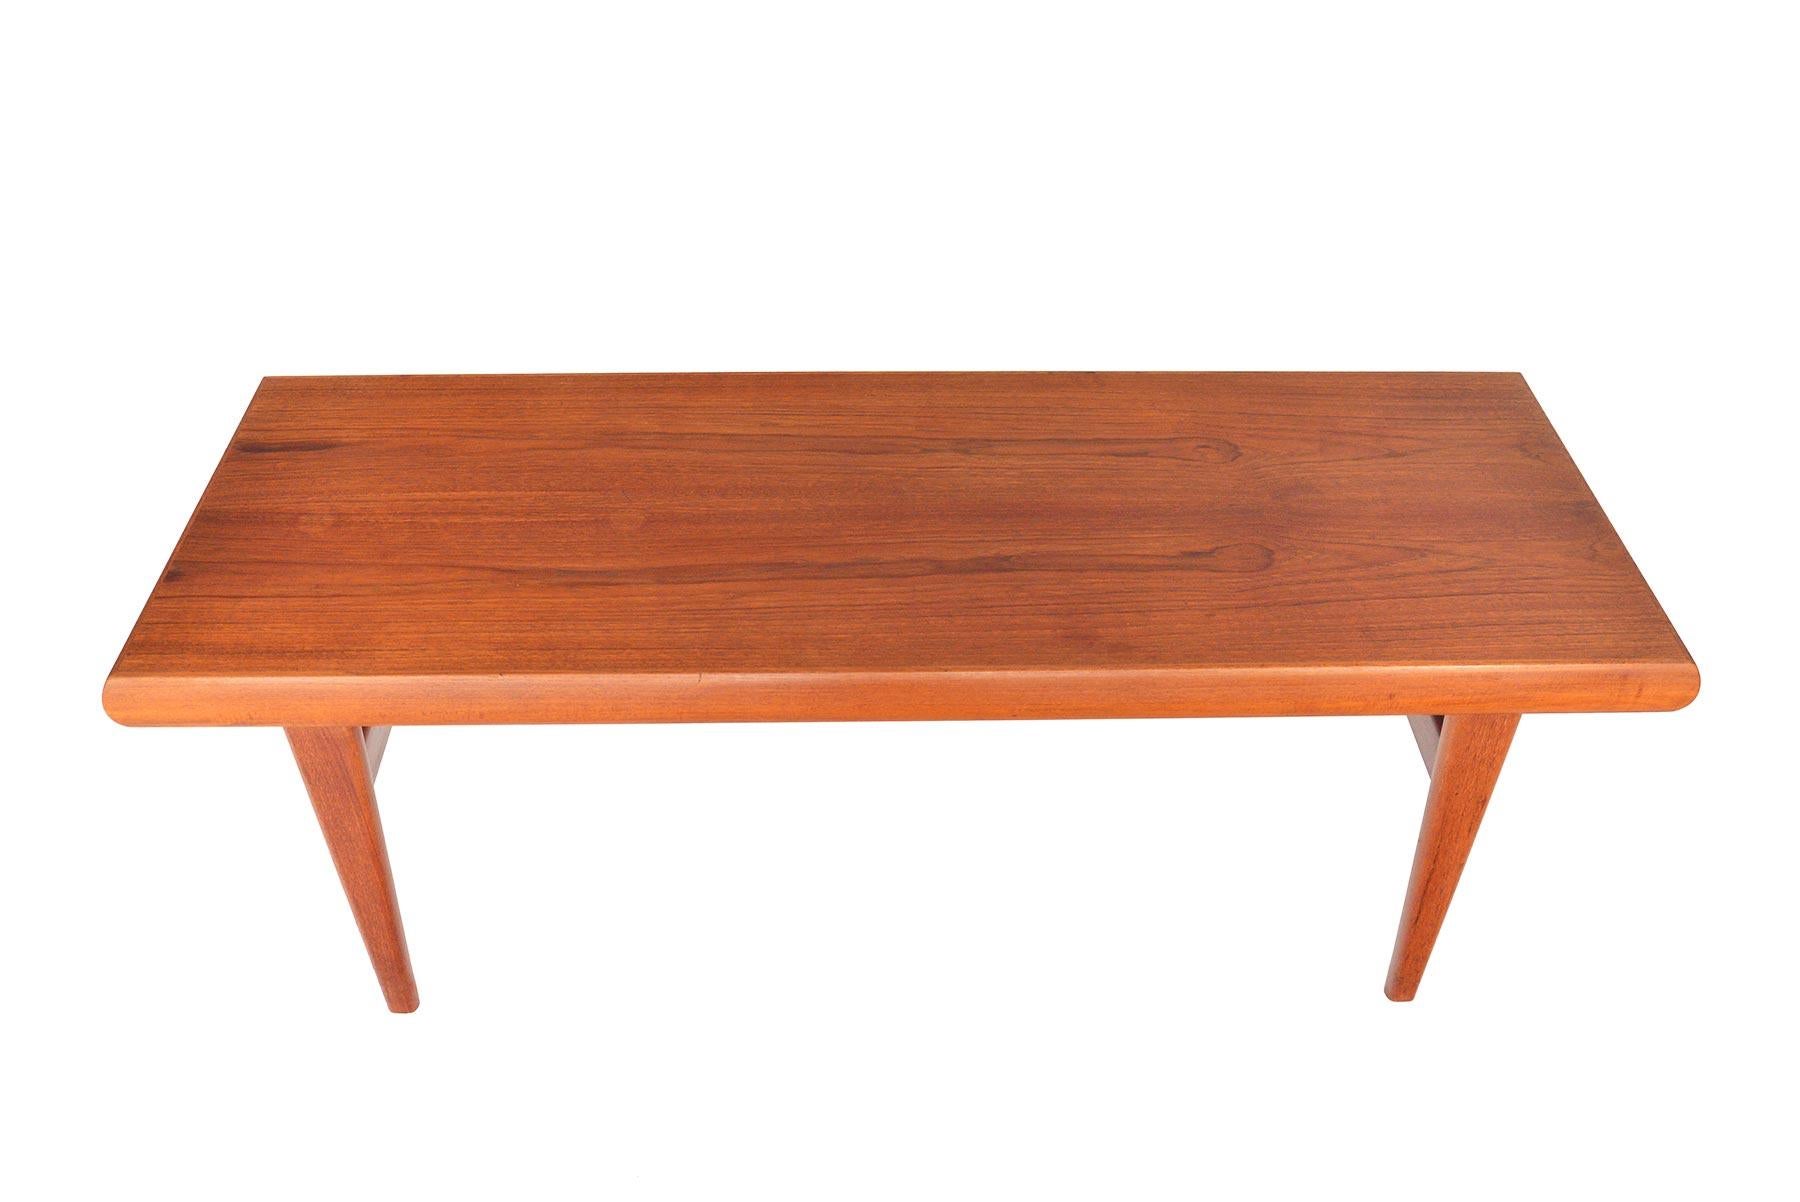 20th Century Midcentury Teak Coffee Table with Fold Out Side Table